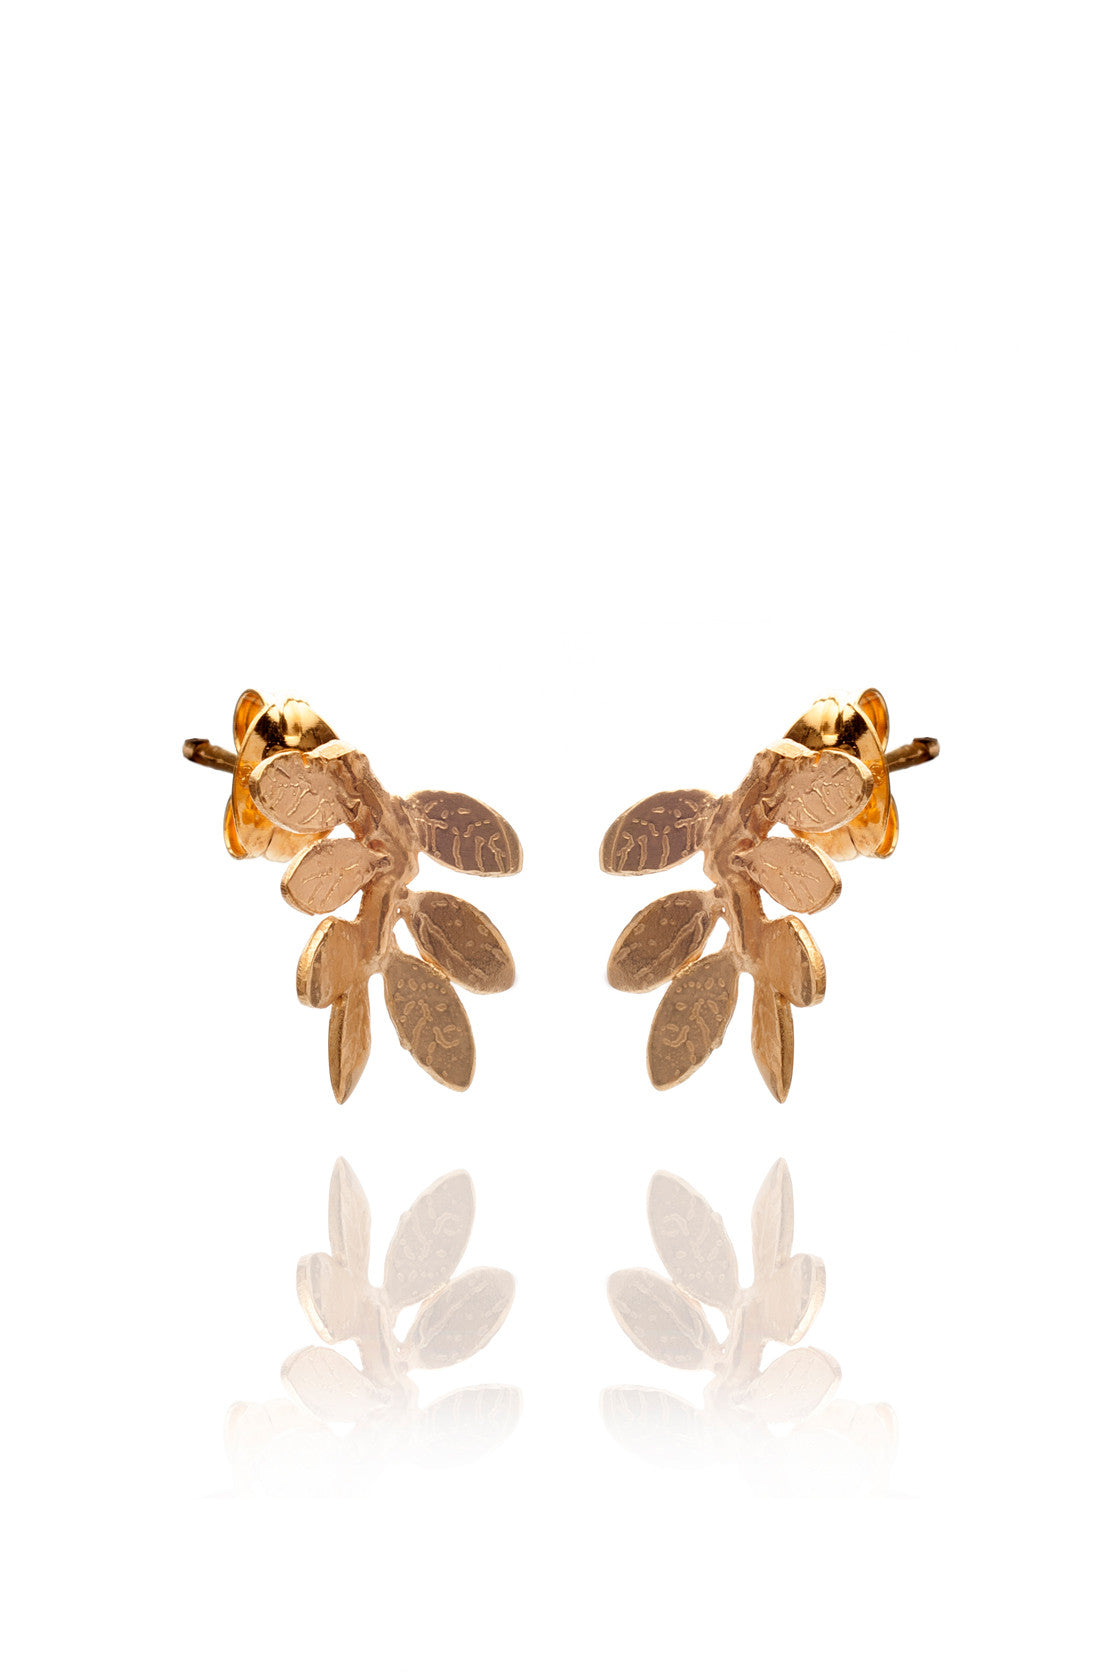 Small yellow gold leaf stud earrings on a white background